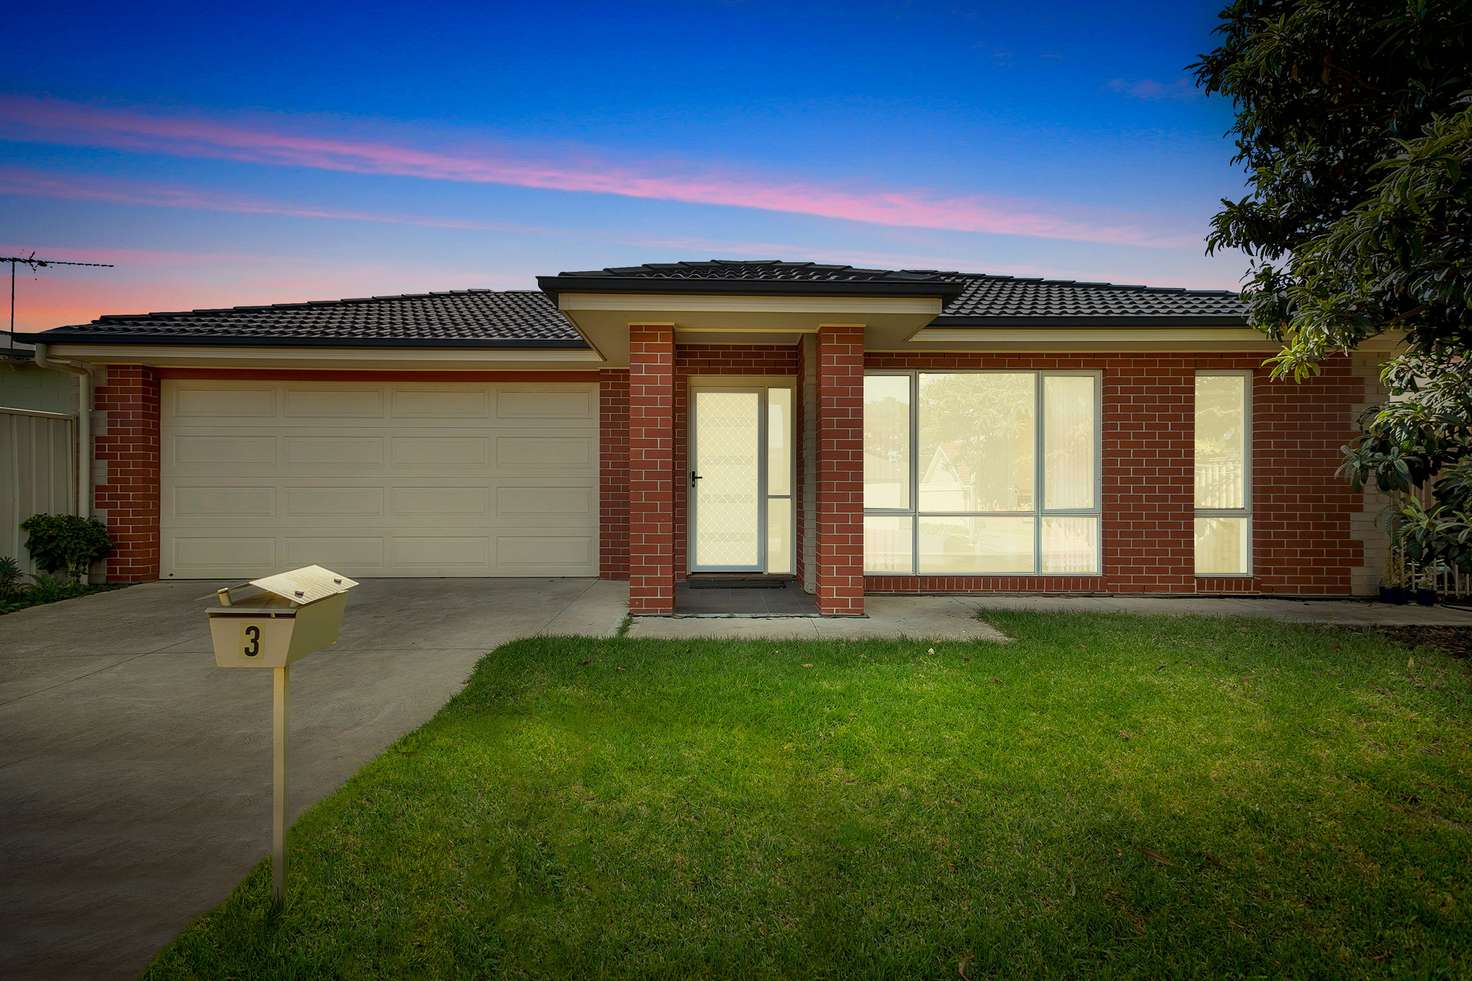 Main view of Homely house listing, 3 Wyn Street, Campbelltown SA 5074